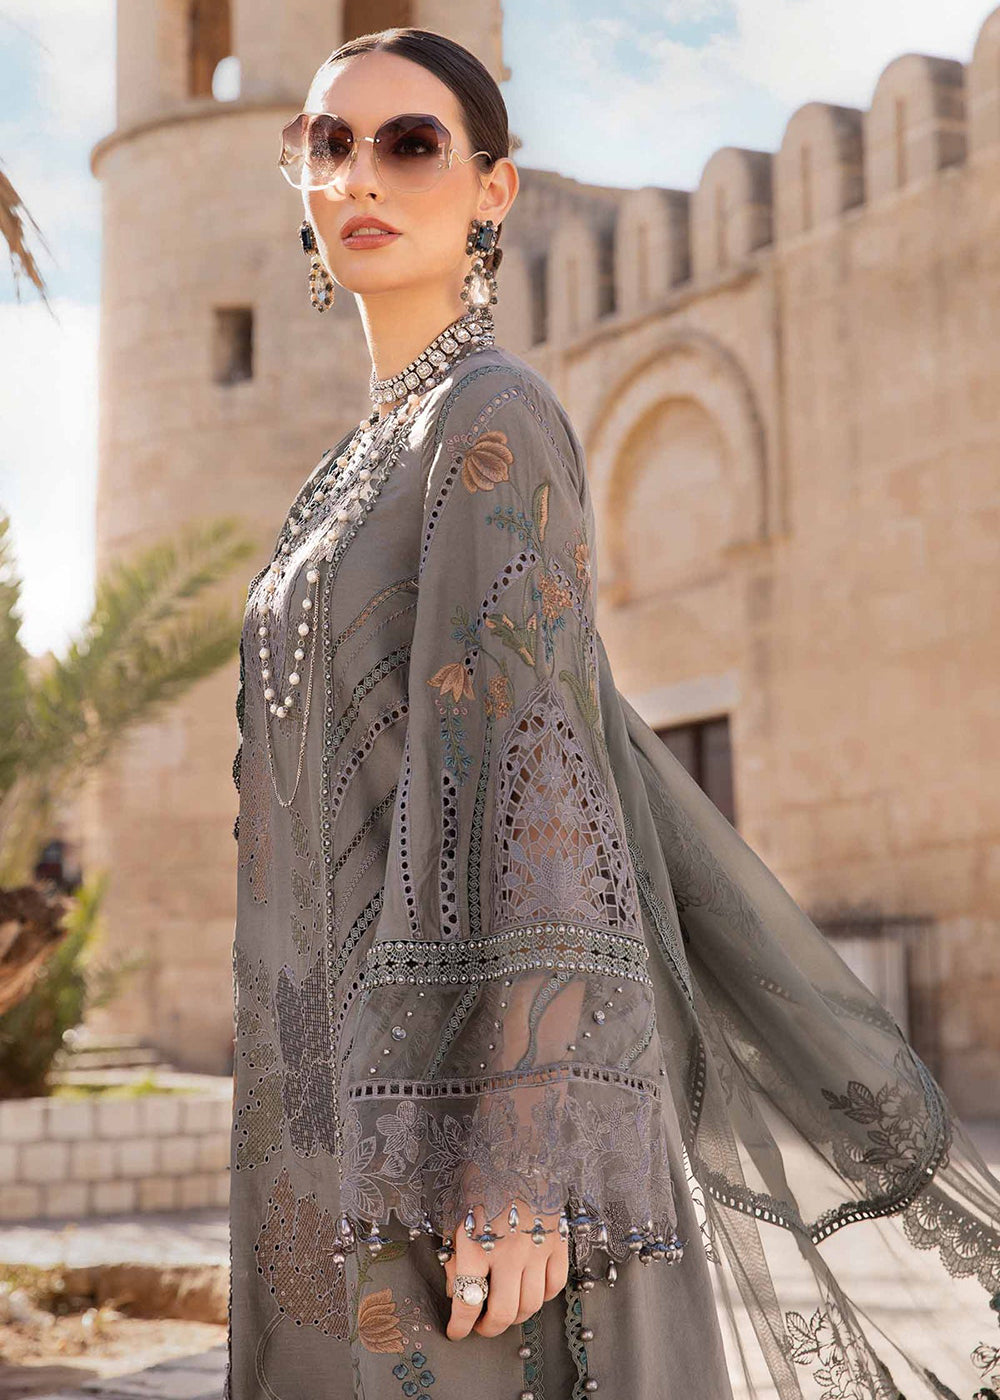 Buy Now Unstitched Voyage a' Luxe Lawn '24 by Maria B | D-2407-B Online at Empress in USA, UK, Canada & Worldwide at Empress Clothing.